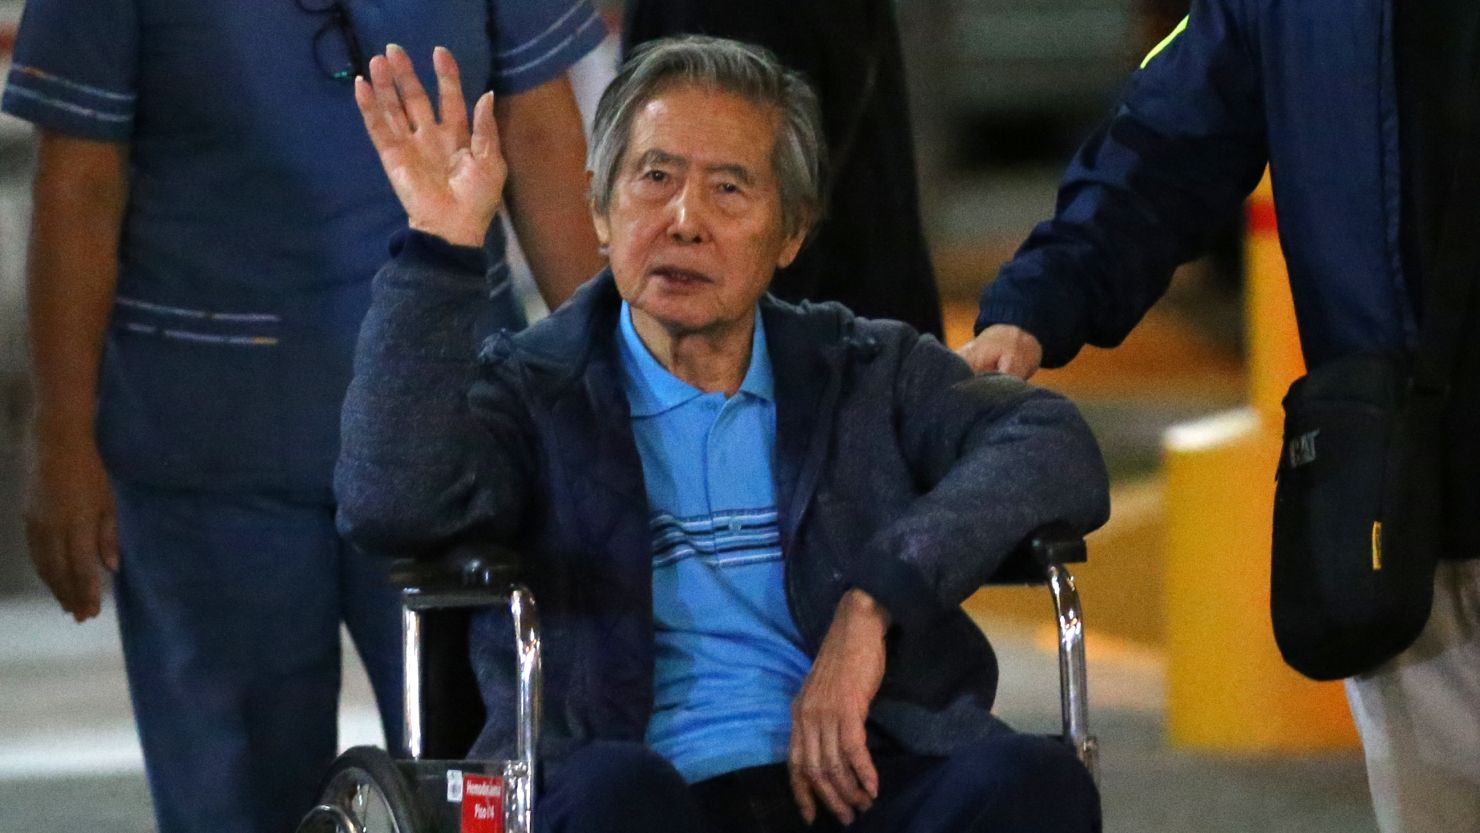 Ex-Peruvian President Alberto Fujimori is wheeled out of a Lima clinic in January after being hospitalized.